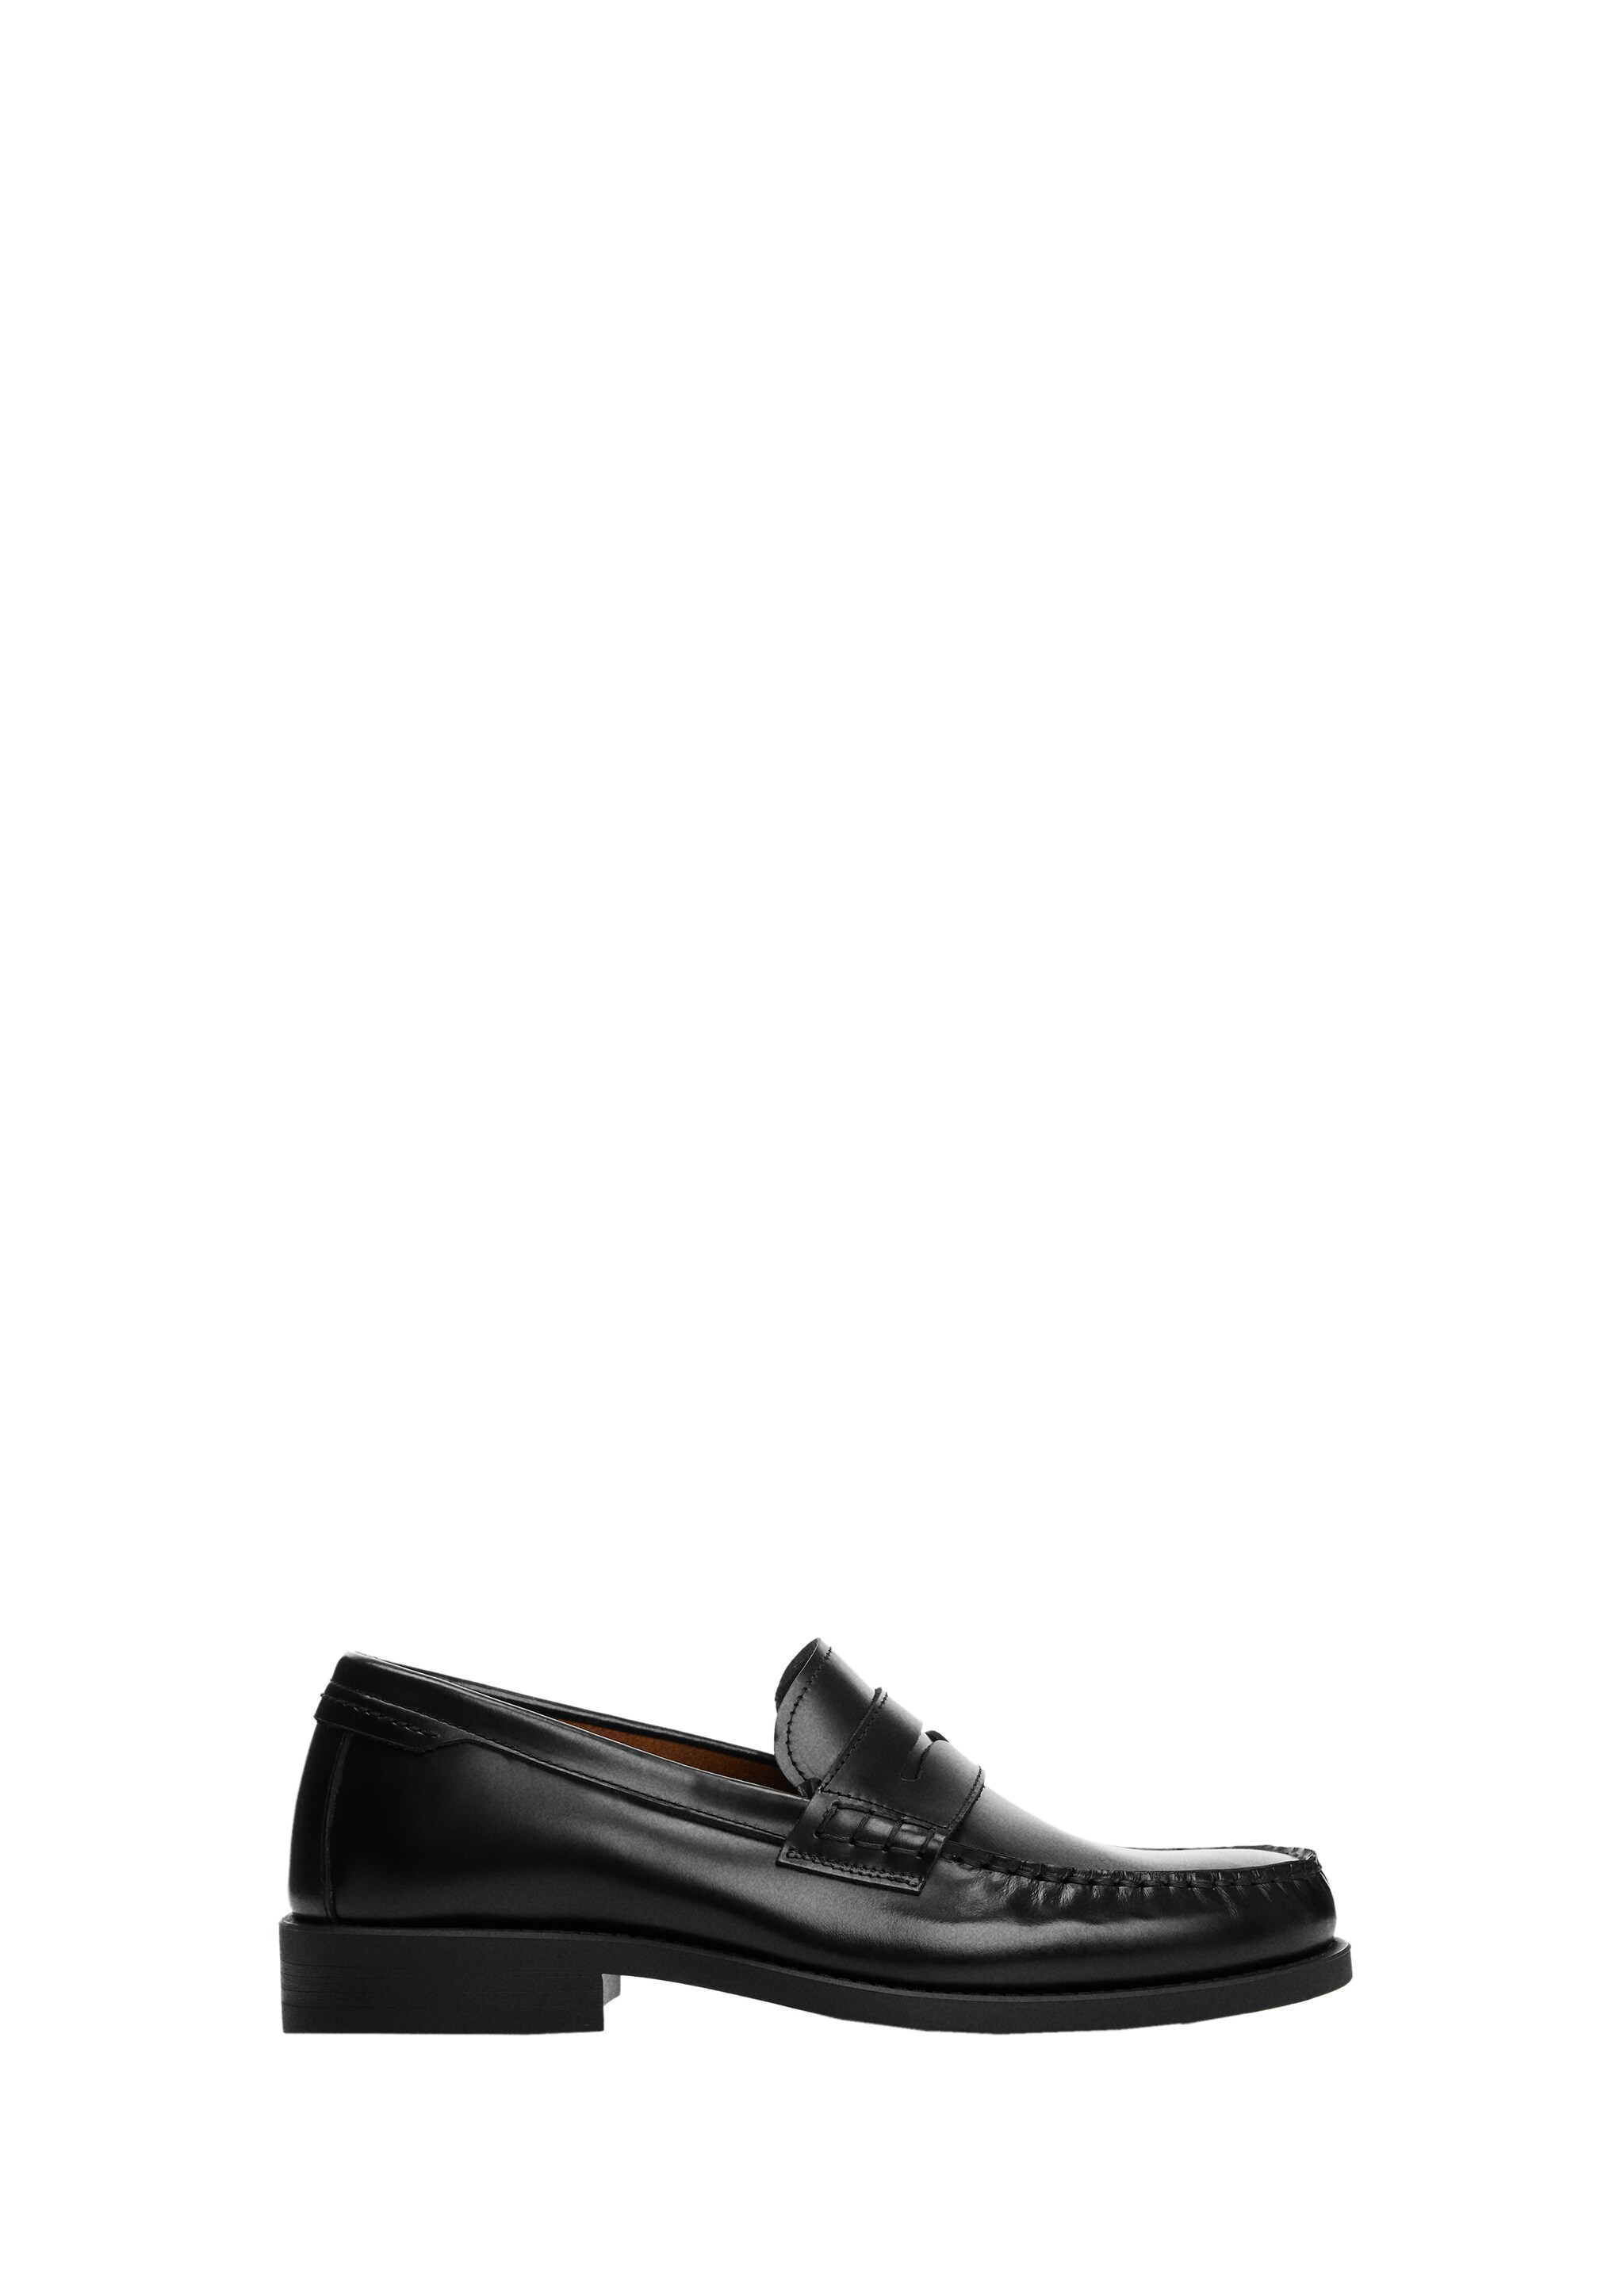 Aged-leather loafers - Details of the article 9